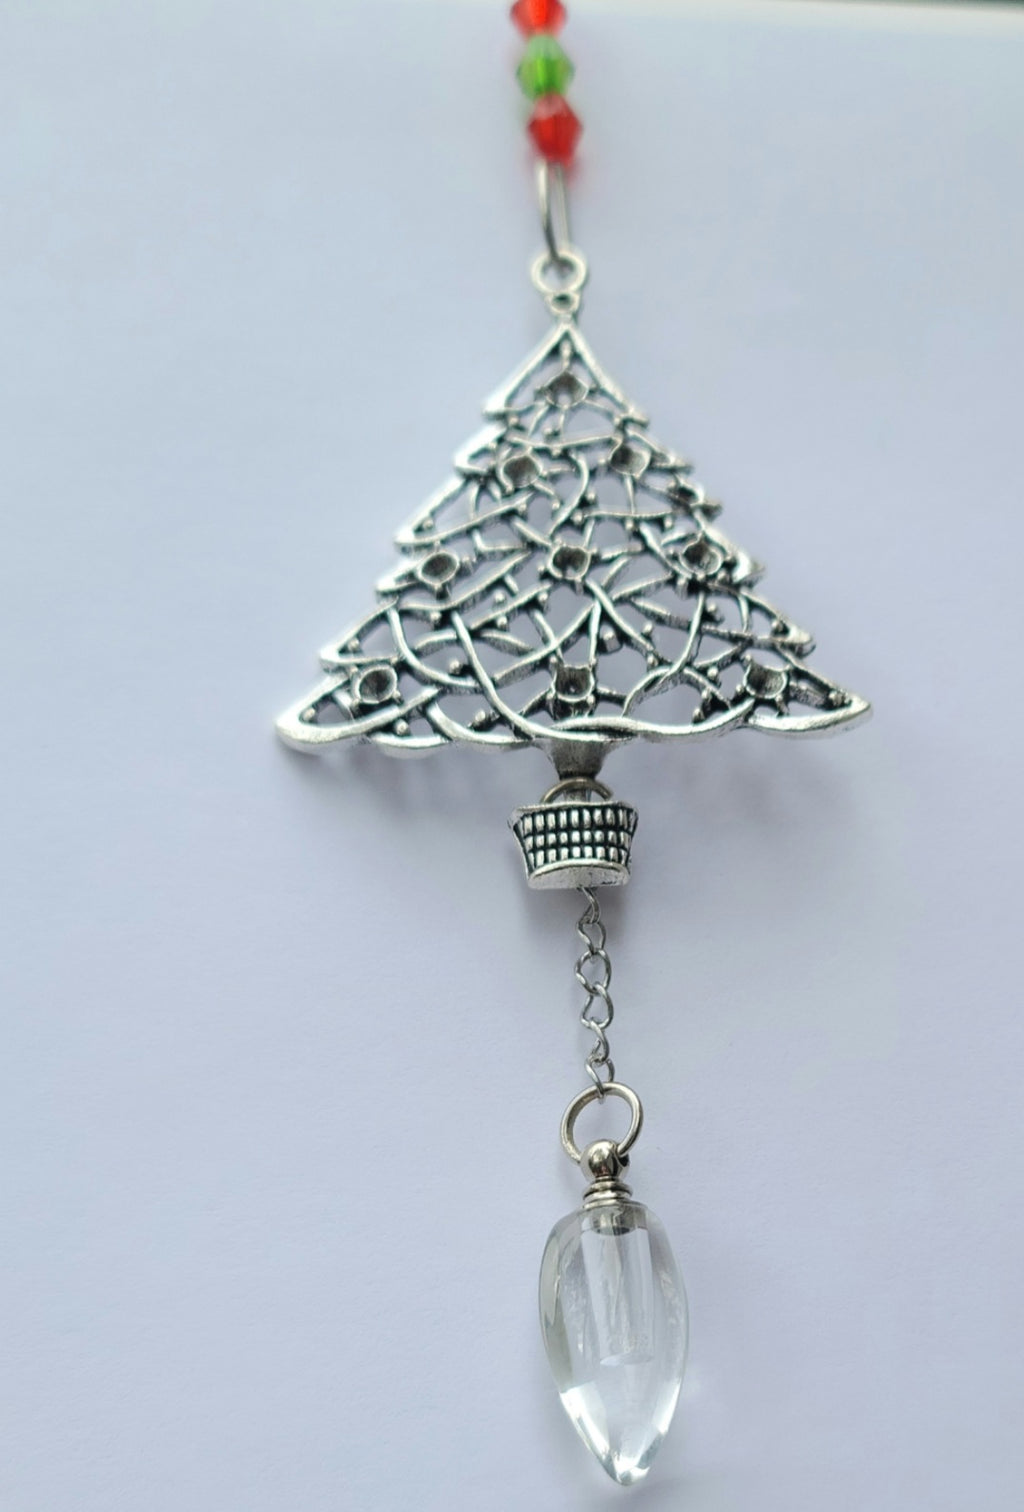 DIY Christmas Tree Ornament Cremation Urn Bead Memorial Holiday Gift with Filling Tools